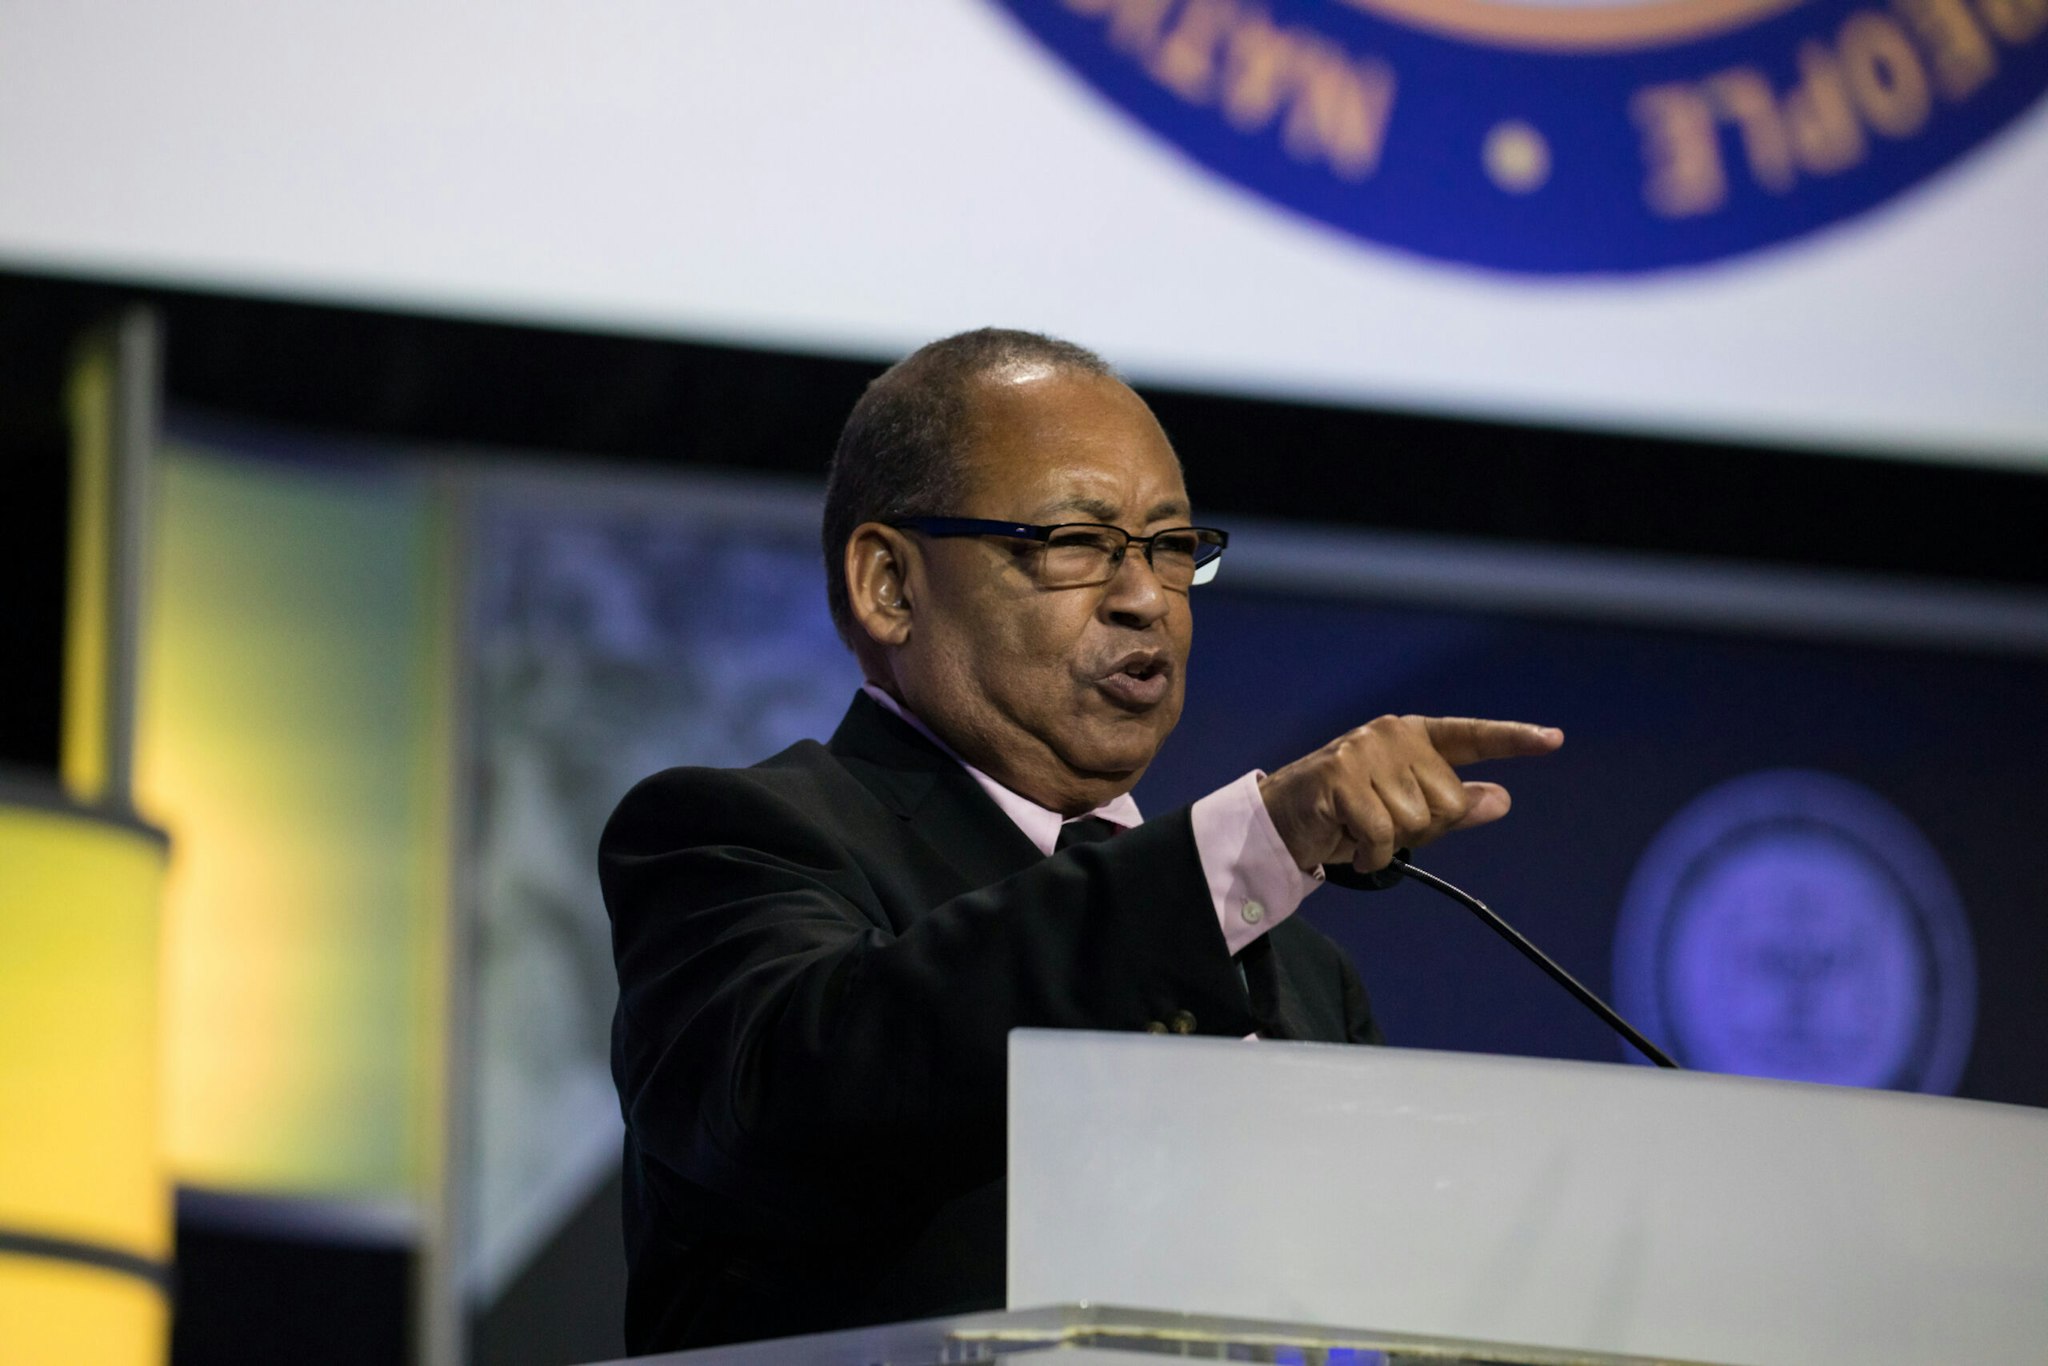 Leon Russell, Chairman, NAACP National Board of Directors, speaks during day three of the NAACPs 108th Annual Convention at the Baltimore Convention Center, in Baltimore, MD. On July 24, 2017. (Photo by Cheriss May) (Photo by Cheriss May/NurPhoto via Getty Images)